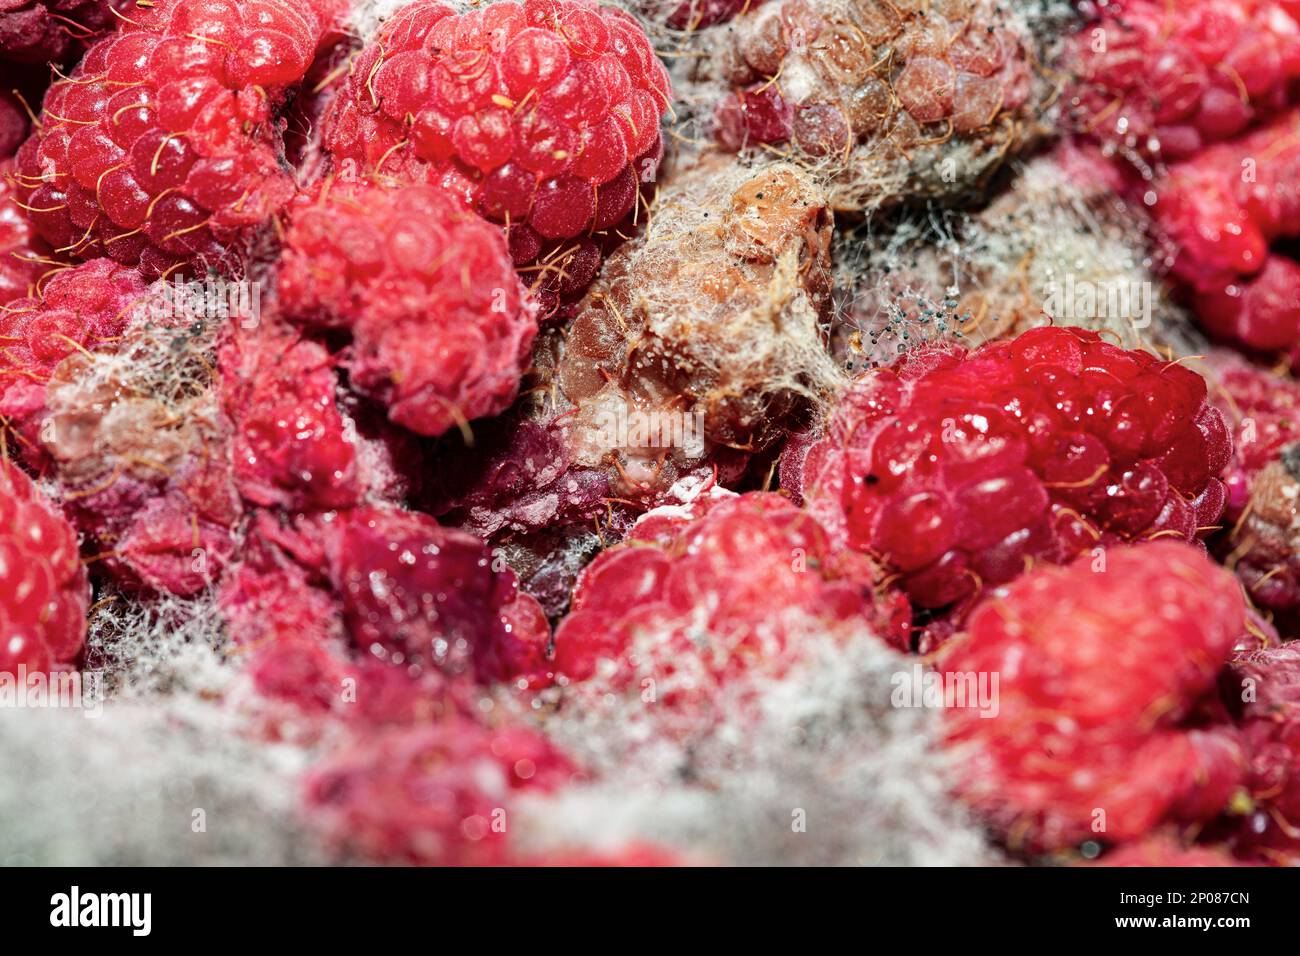 Raspberry with mold . Moldy berries can cause diarrhea Stock Photo